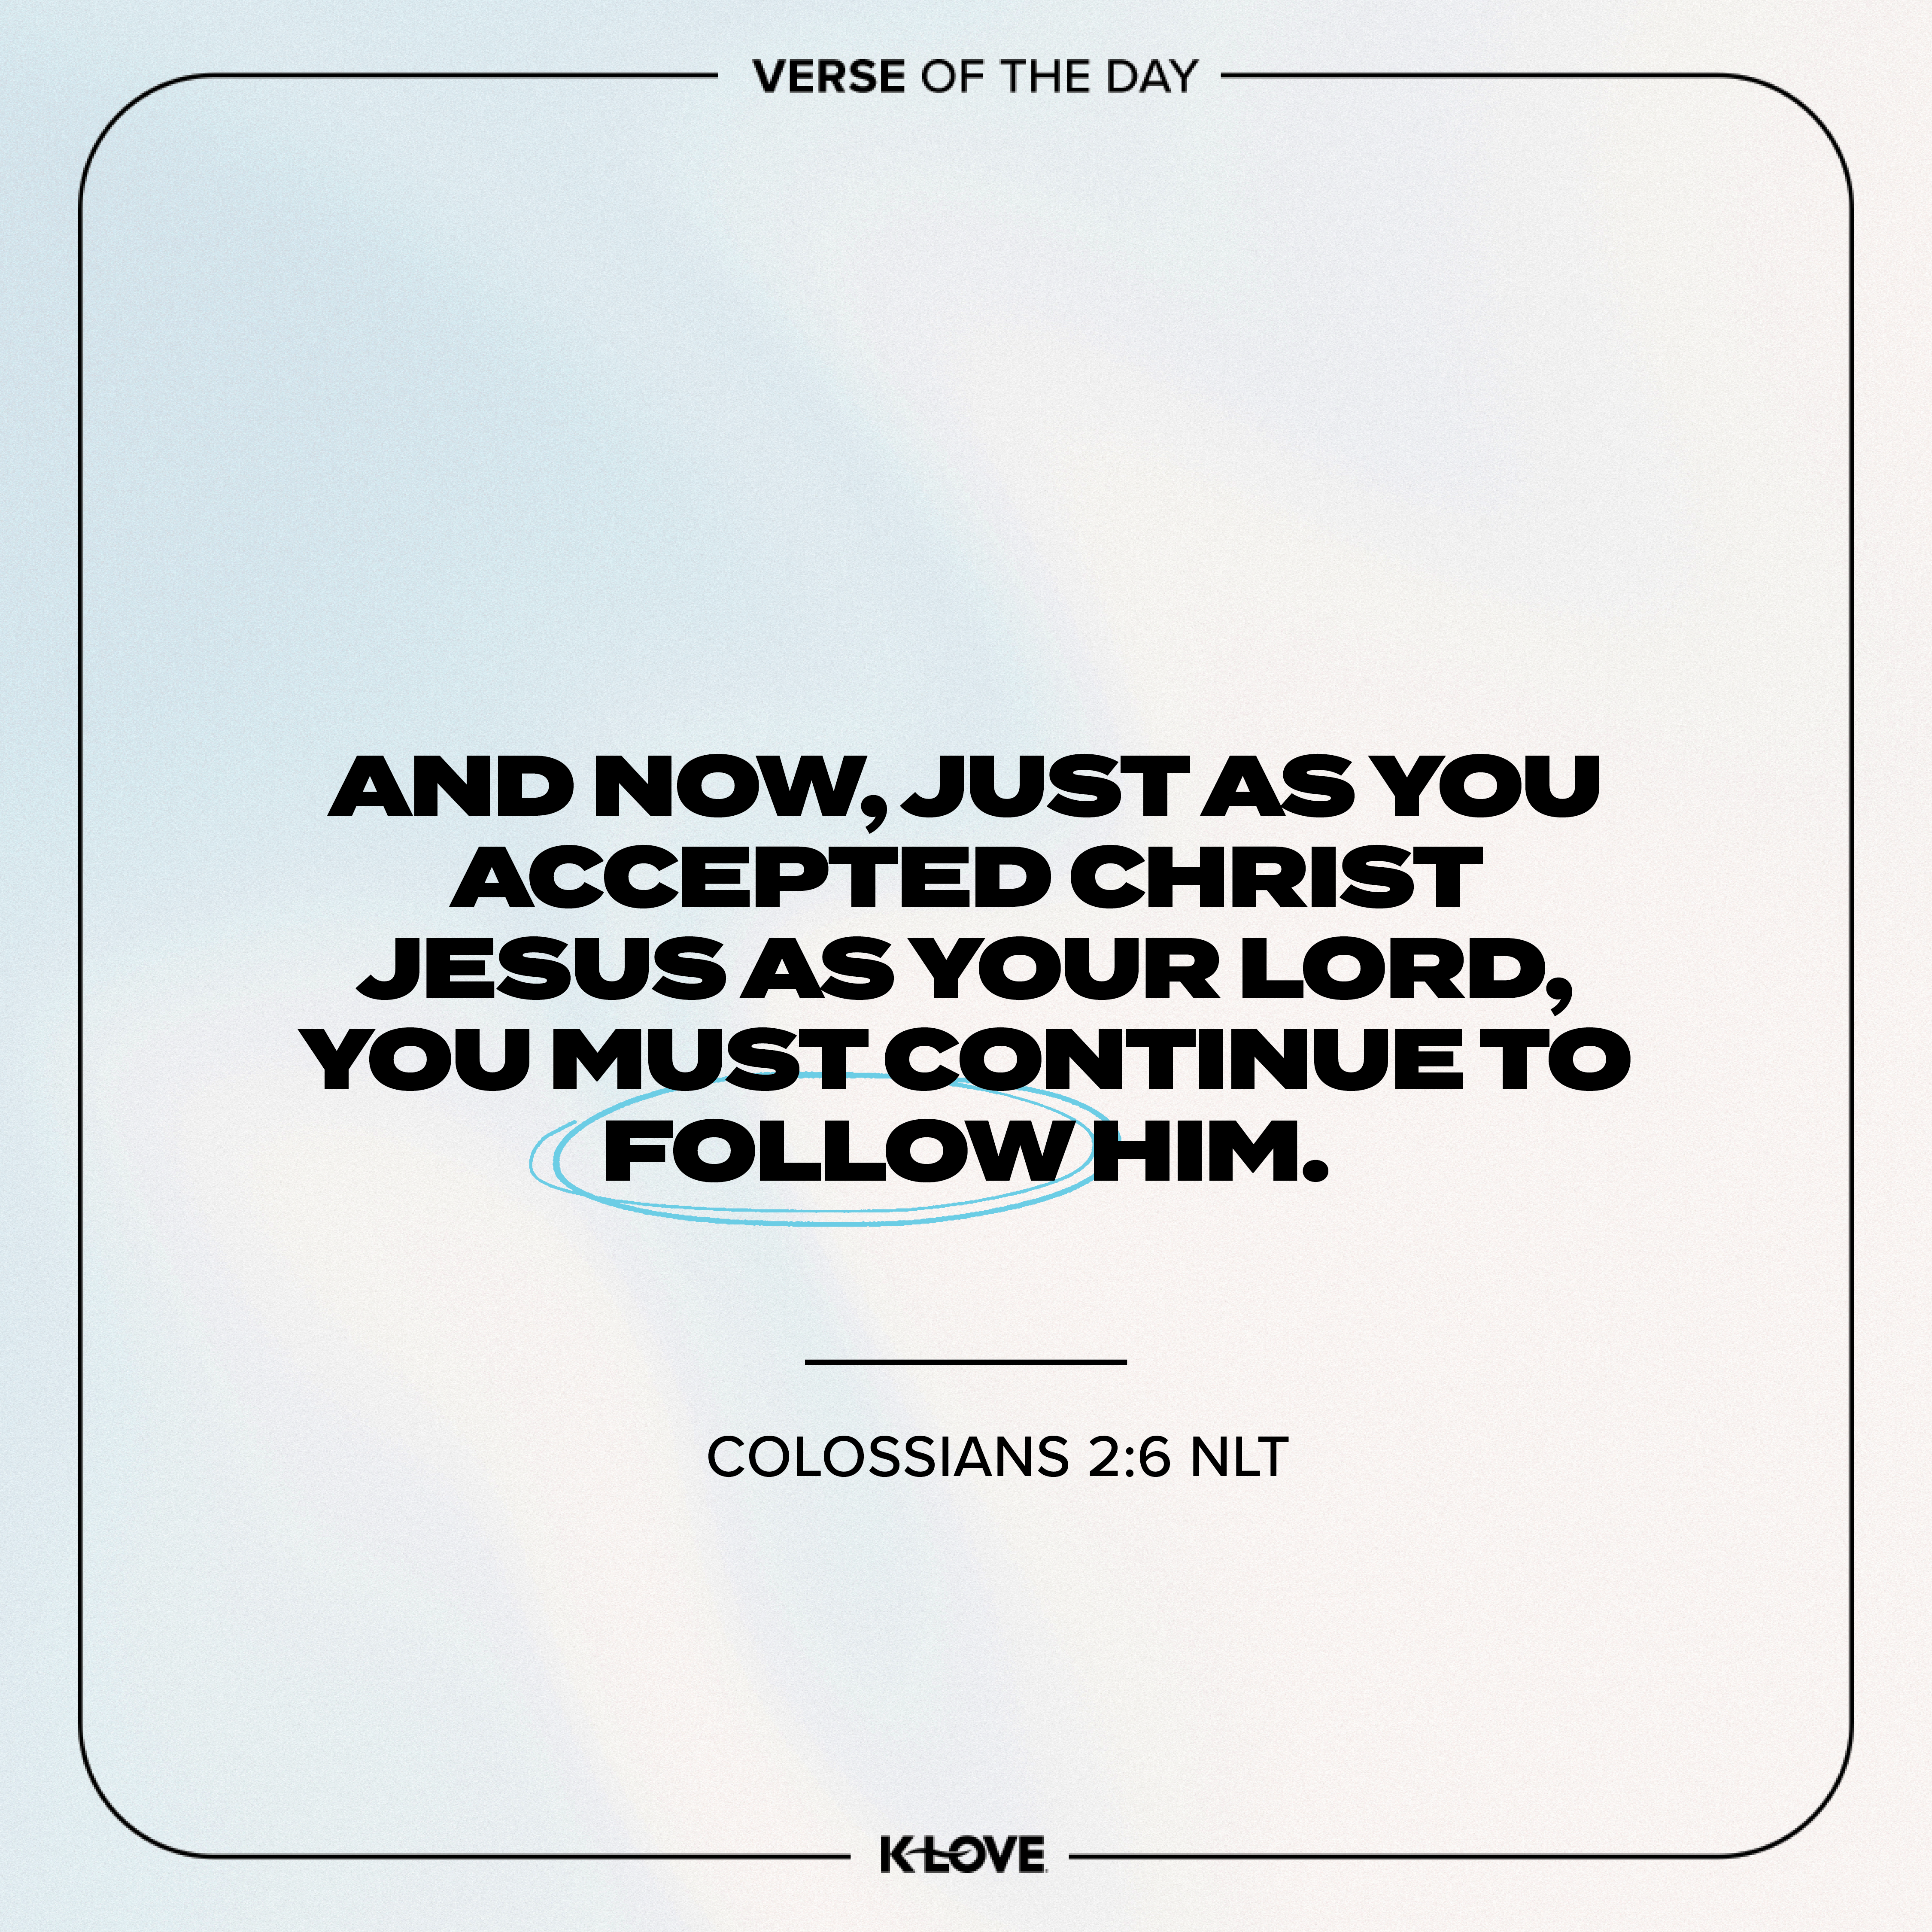 And now, just as you accepted Christ Jesus as your Lord, you must continue to follow Him.